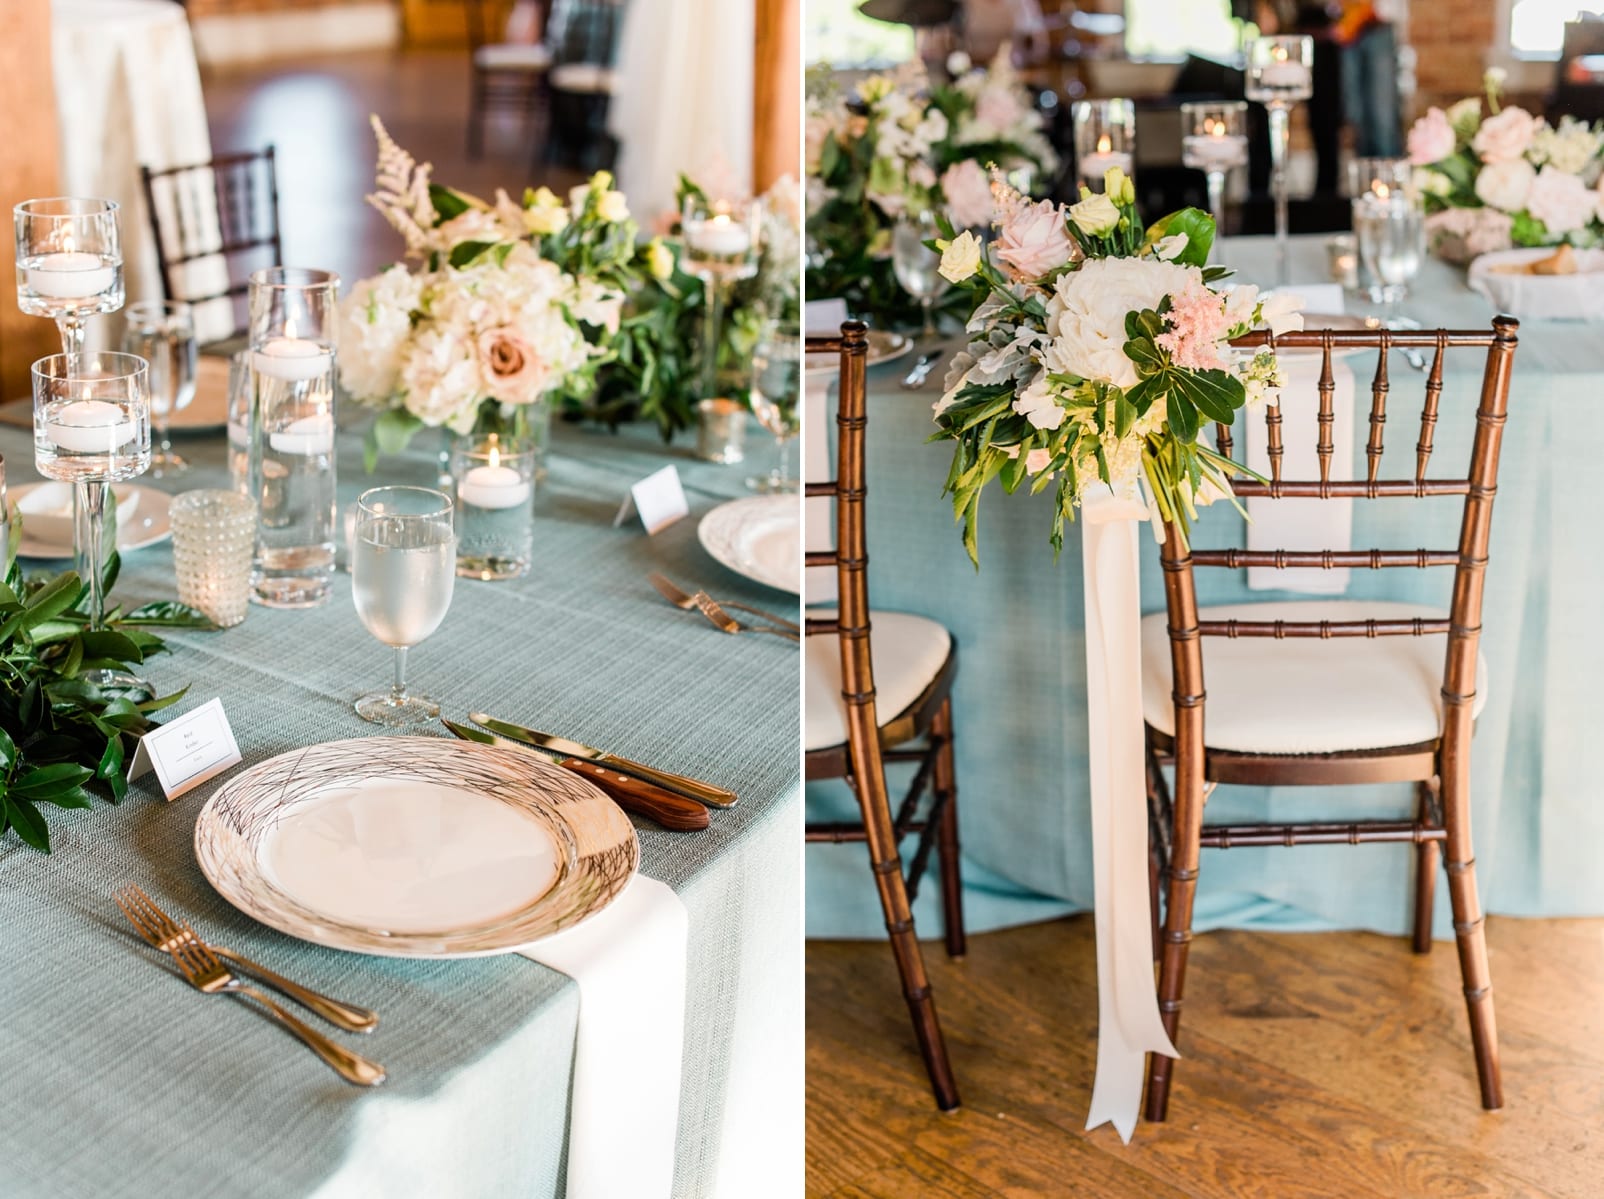 Melrose Knitting Mill wedding reception with florals tied to the corners of the bride and groom chairs photo